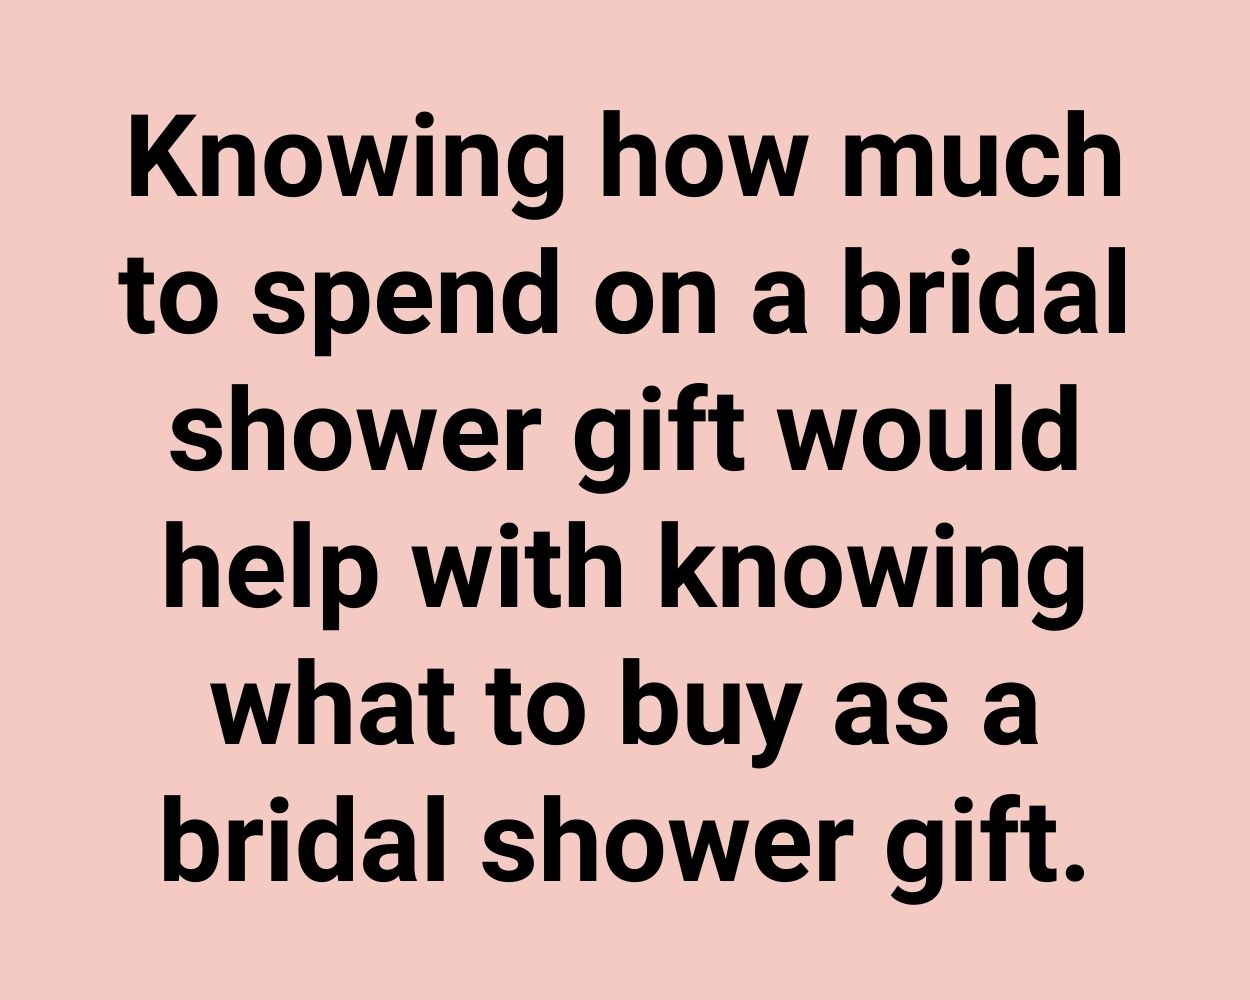 Knowing how much to spend on a bridal shower gift would help with knowing what to buy as a bridal shower gift.